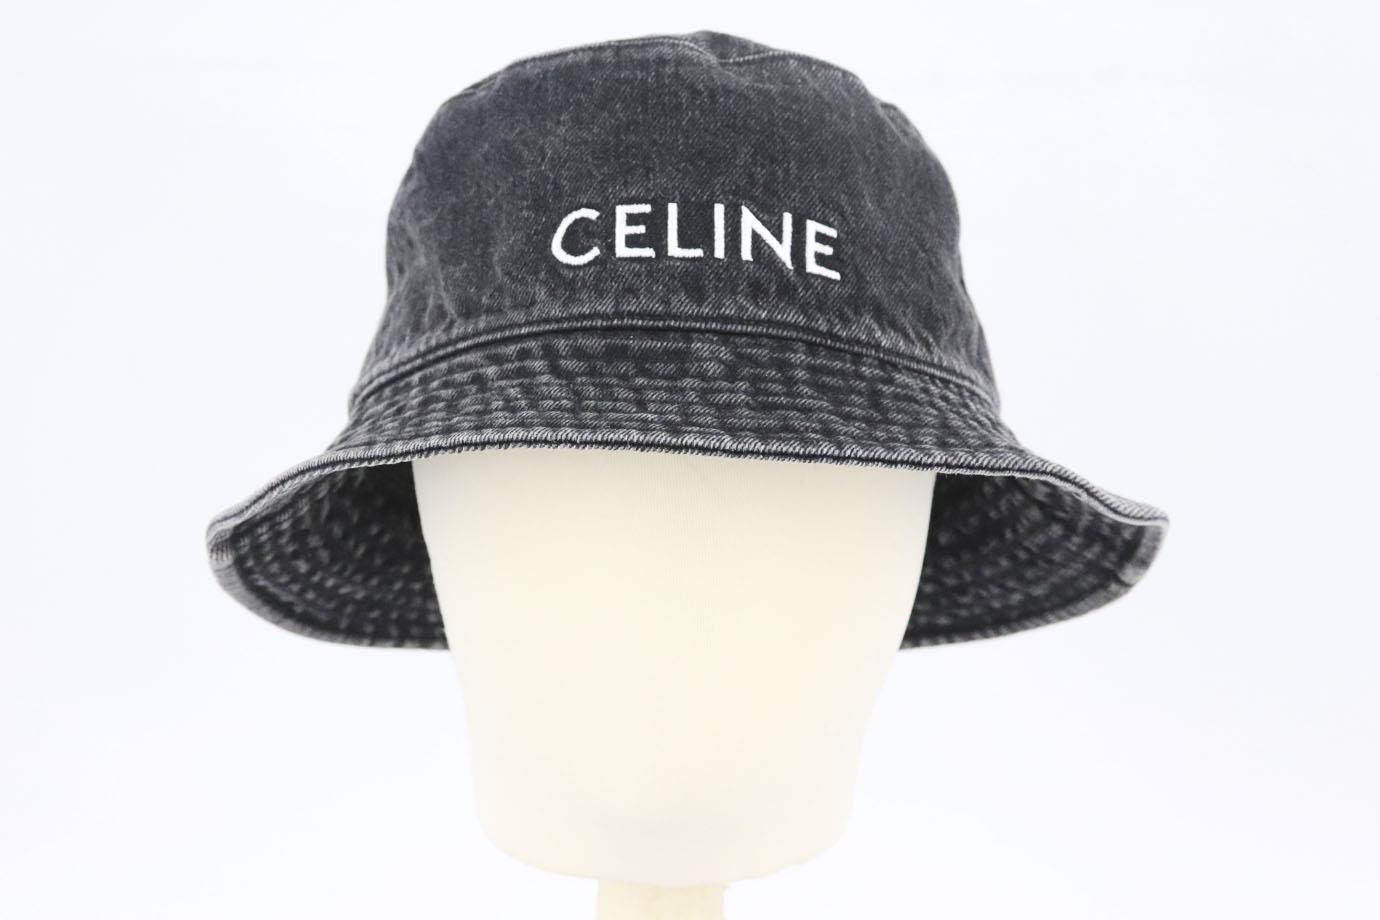 Celine logo embroidered washed denim bucket hat. Black. Slips on. 100% Cotton. Does not come with dustbag or box. Size: Medium (57 cm). Brim width: 2.2 in Very good condition - As new condition, no sign of wear; see pictures.
